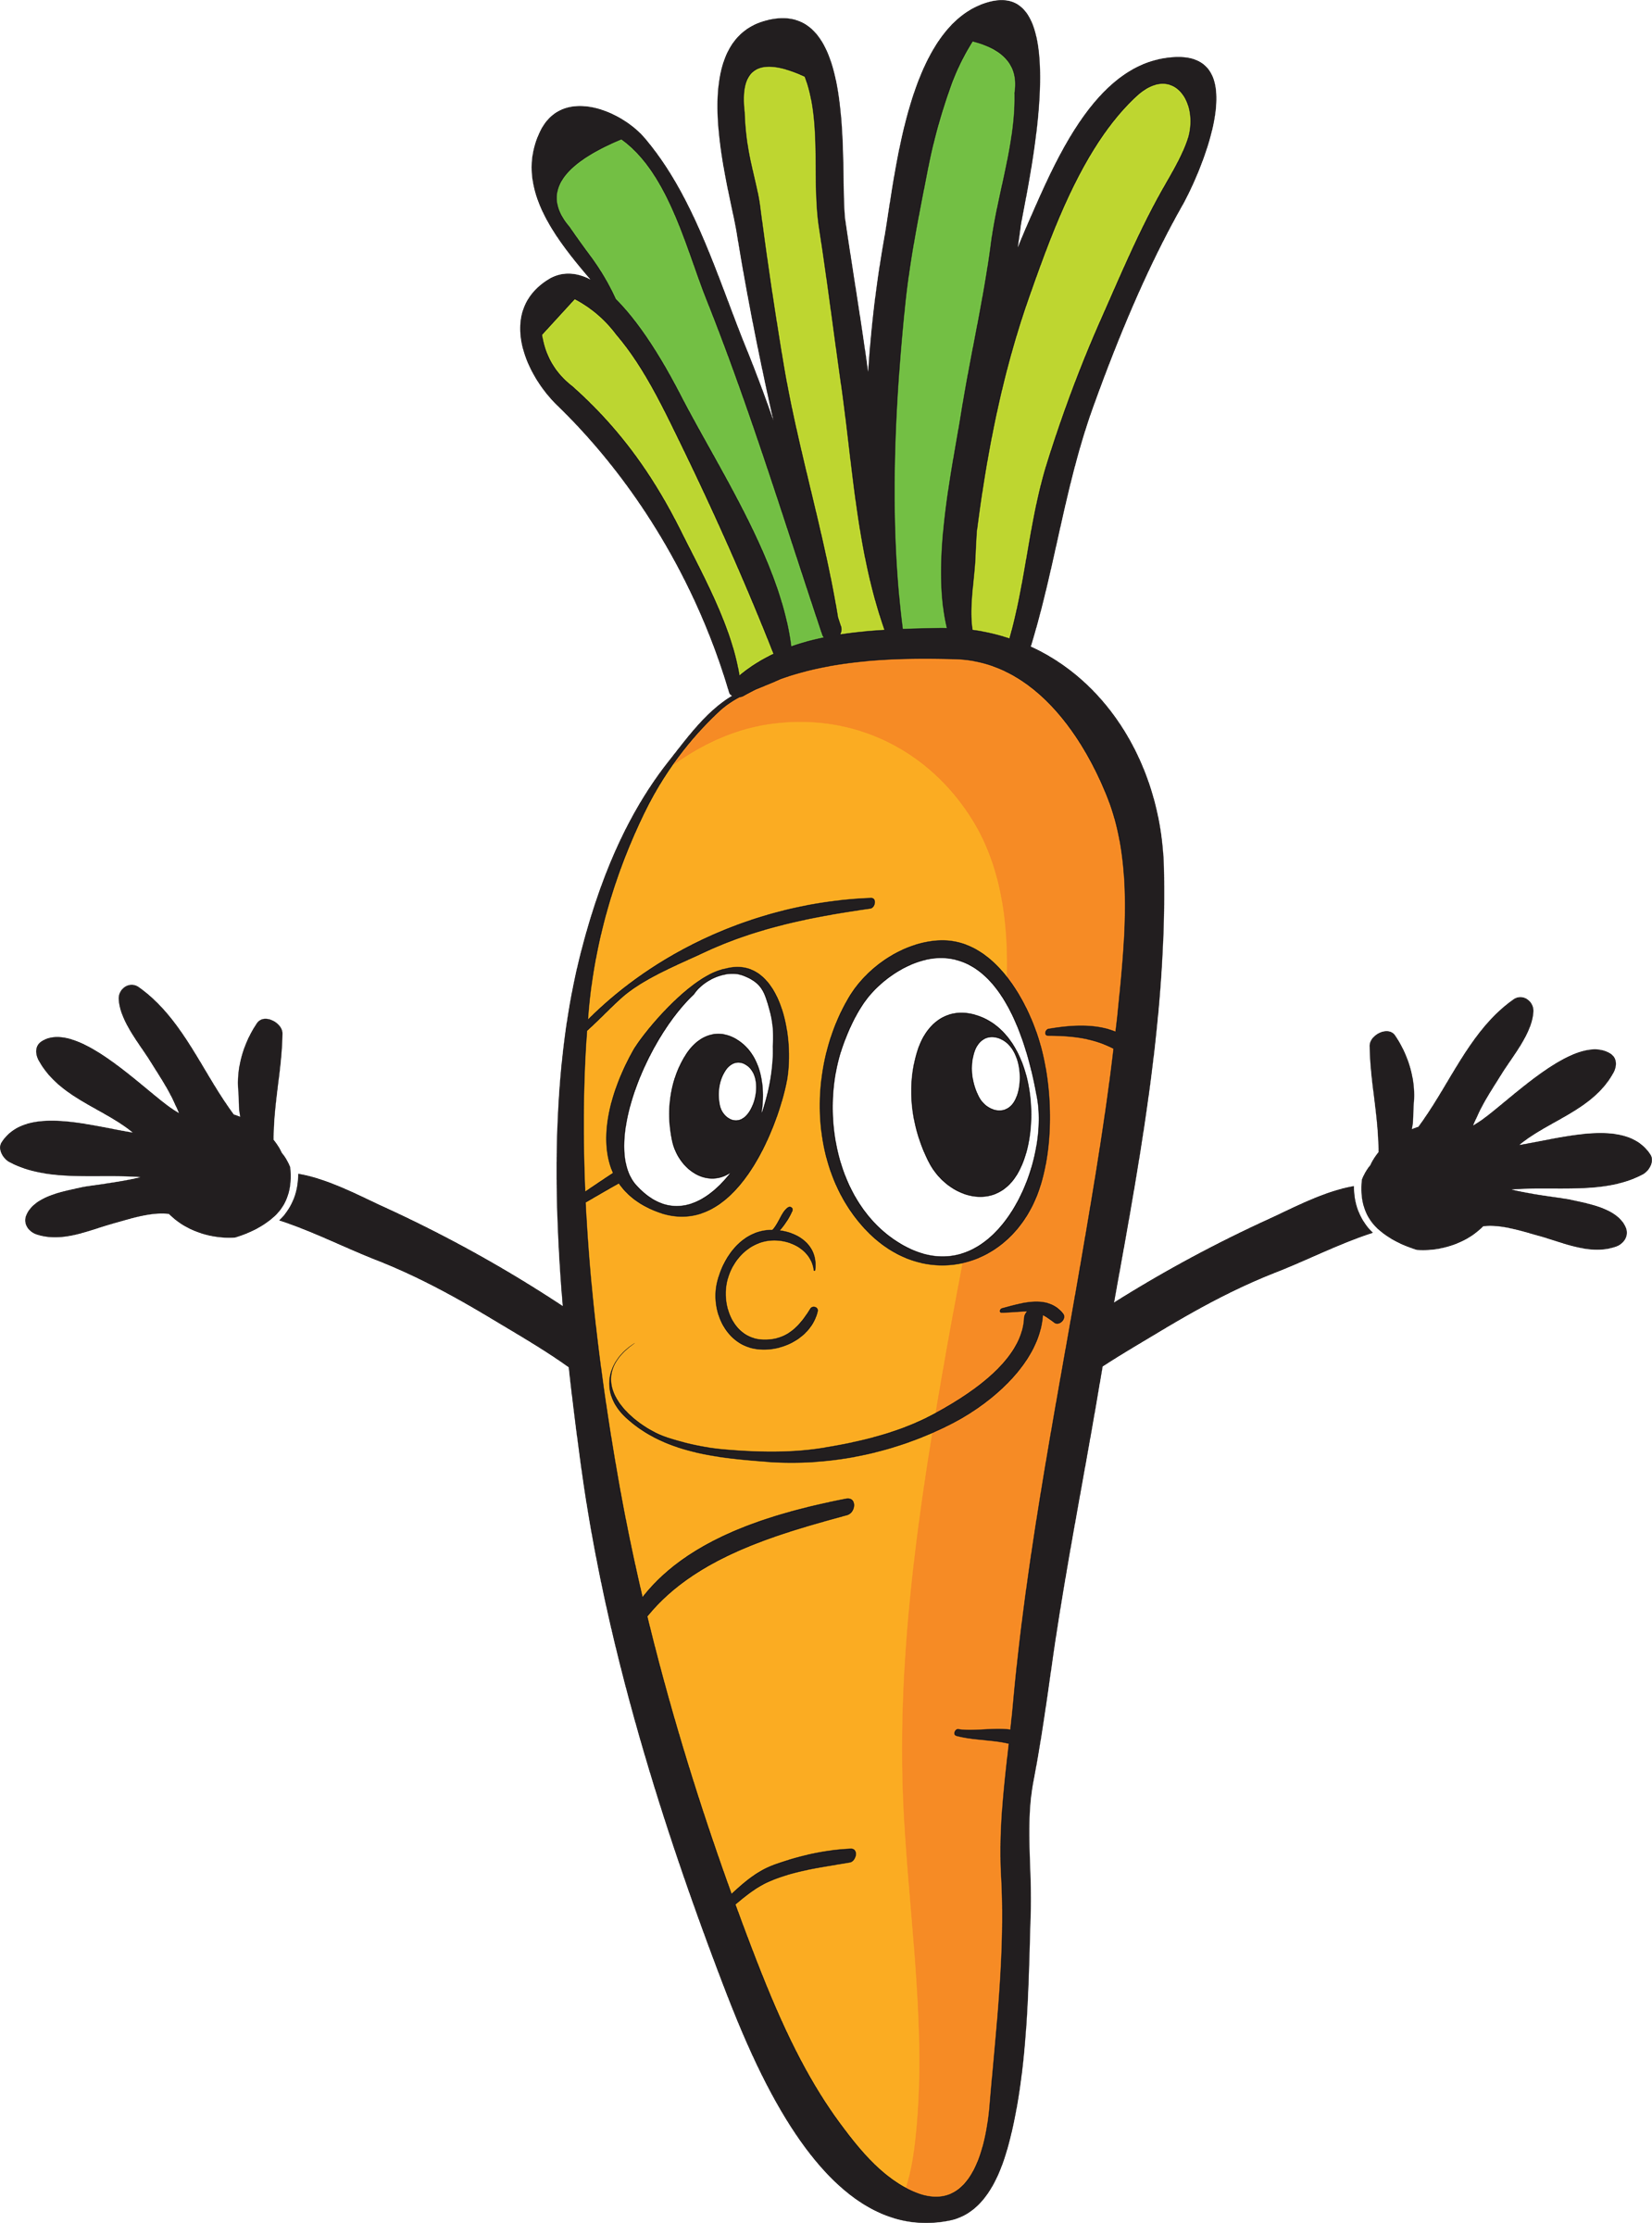 Carrot smile free collection. Zucchini clipart animated